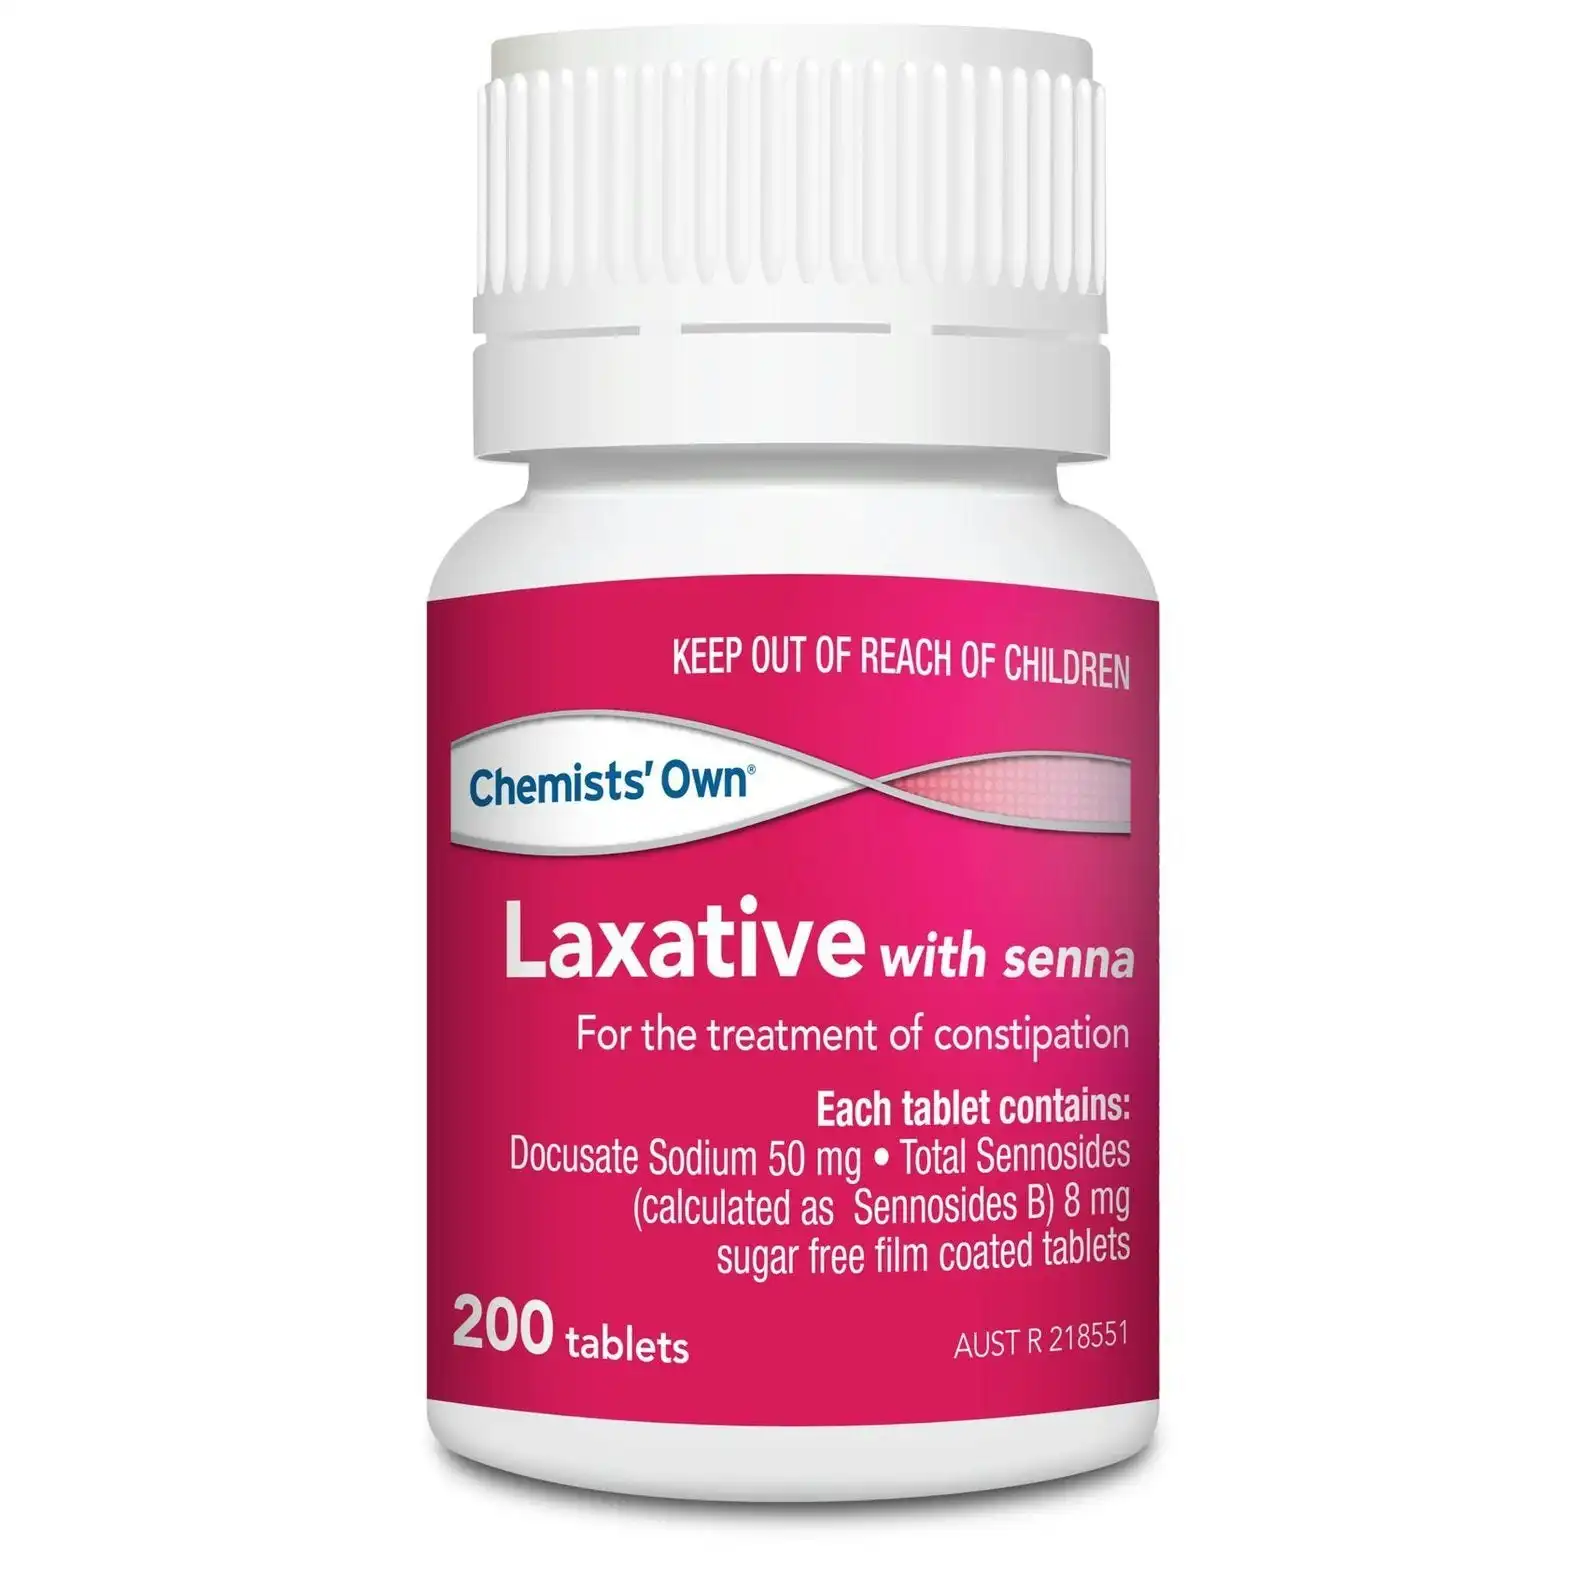 Chemists' Own Laxative with Senna 200 Tablets (Generic of COLOXY WITH SENNA)